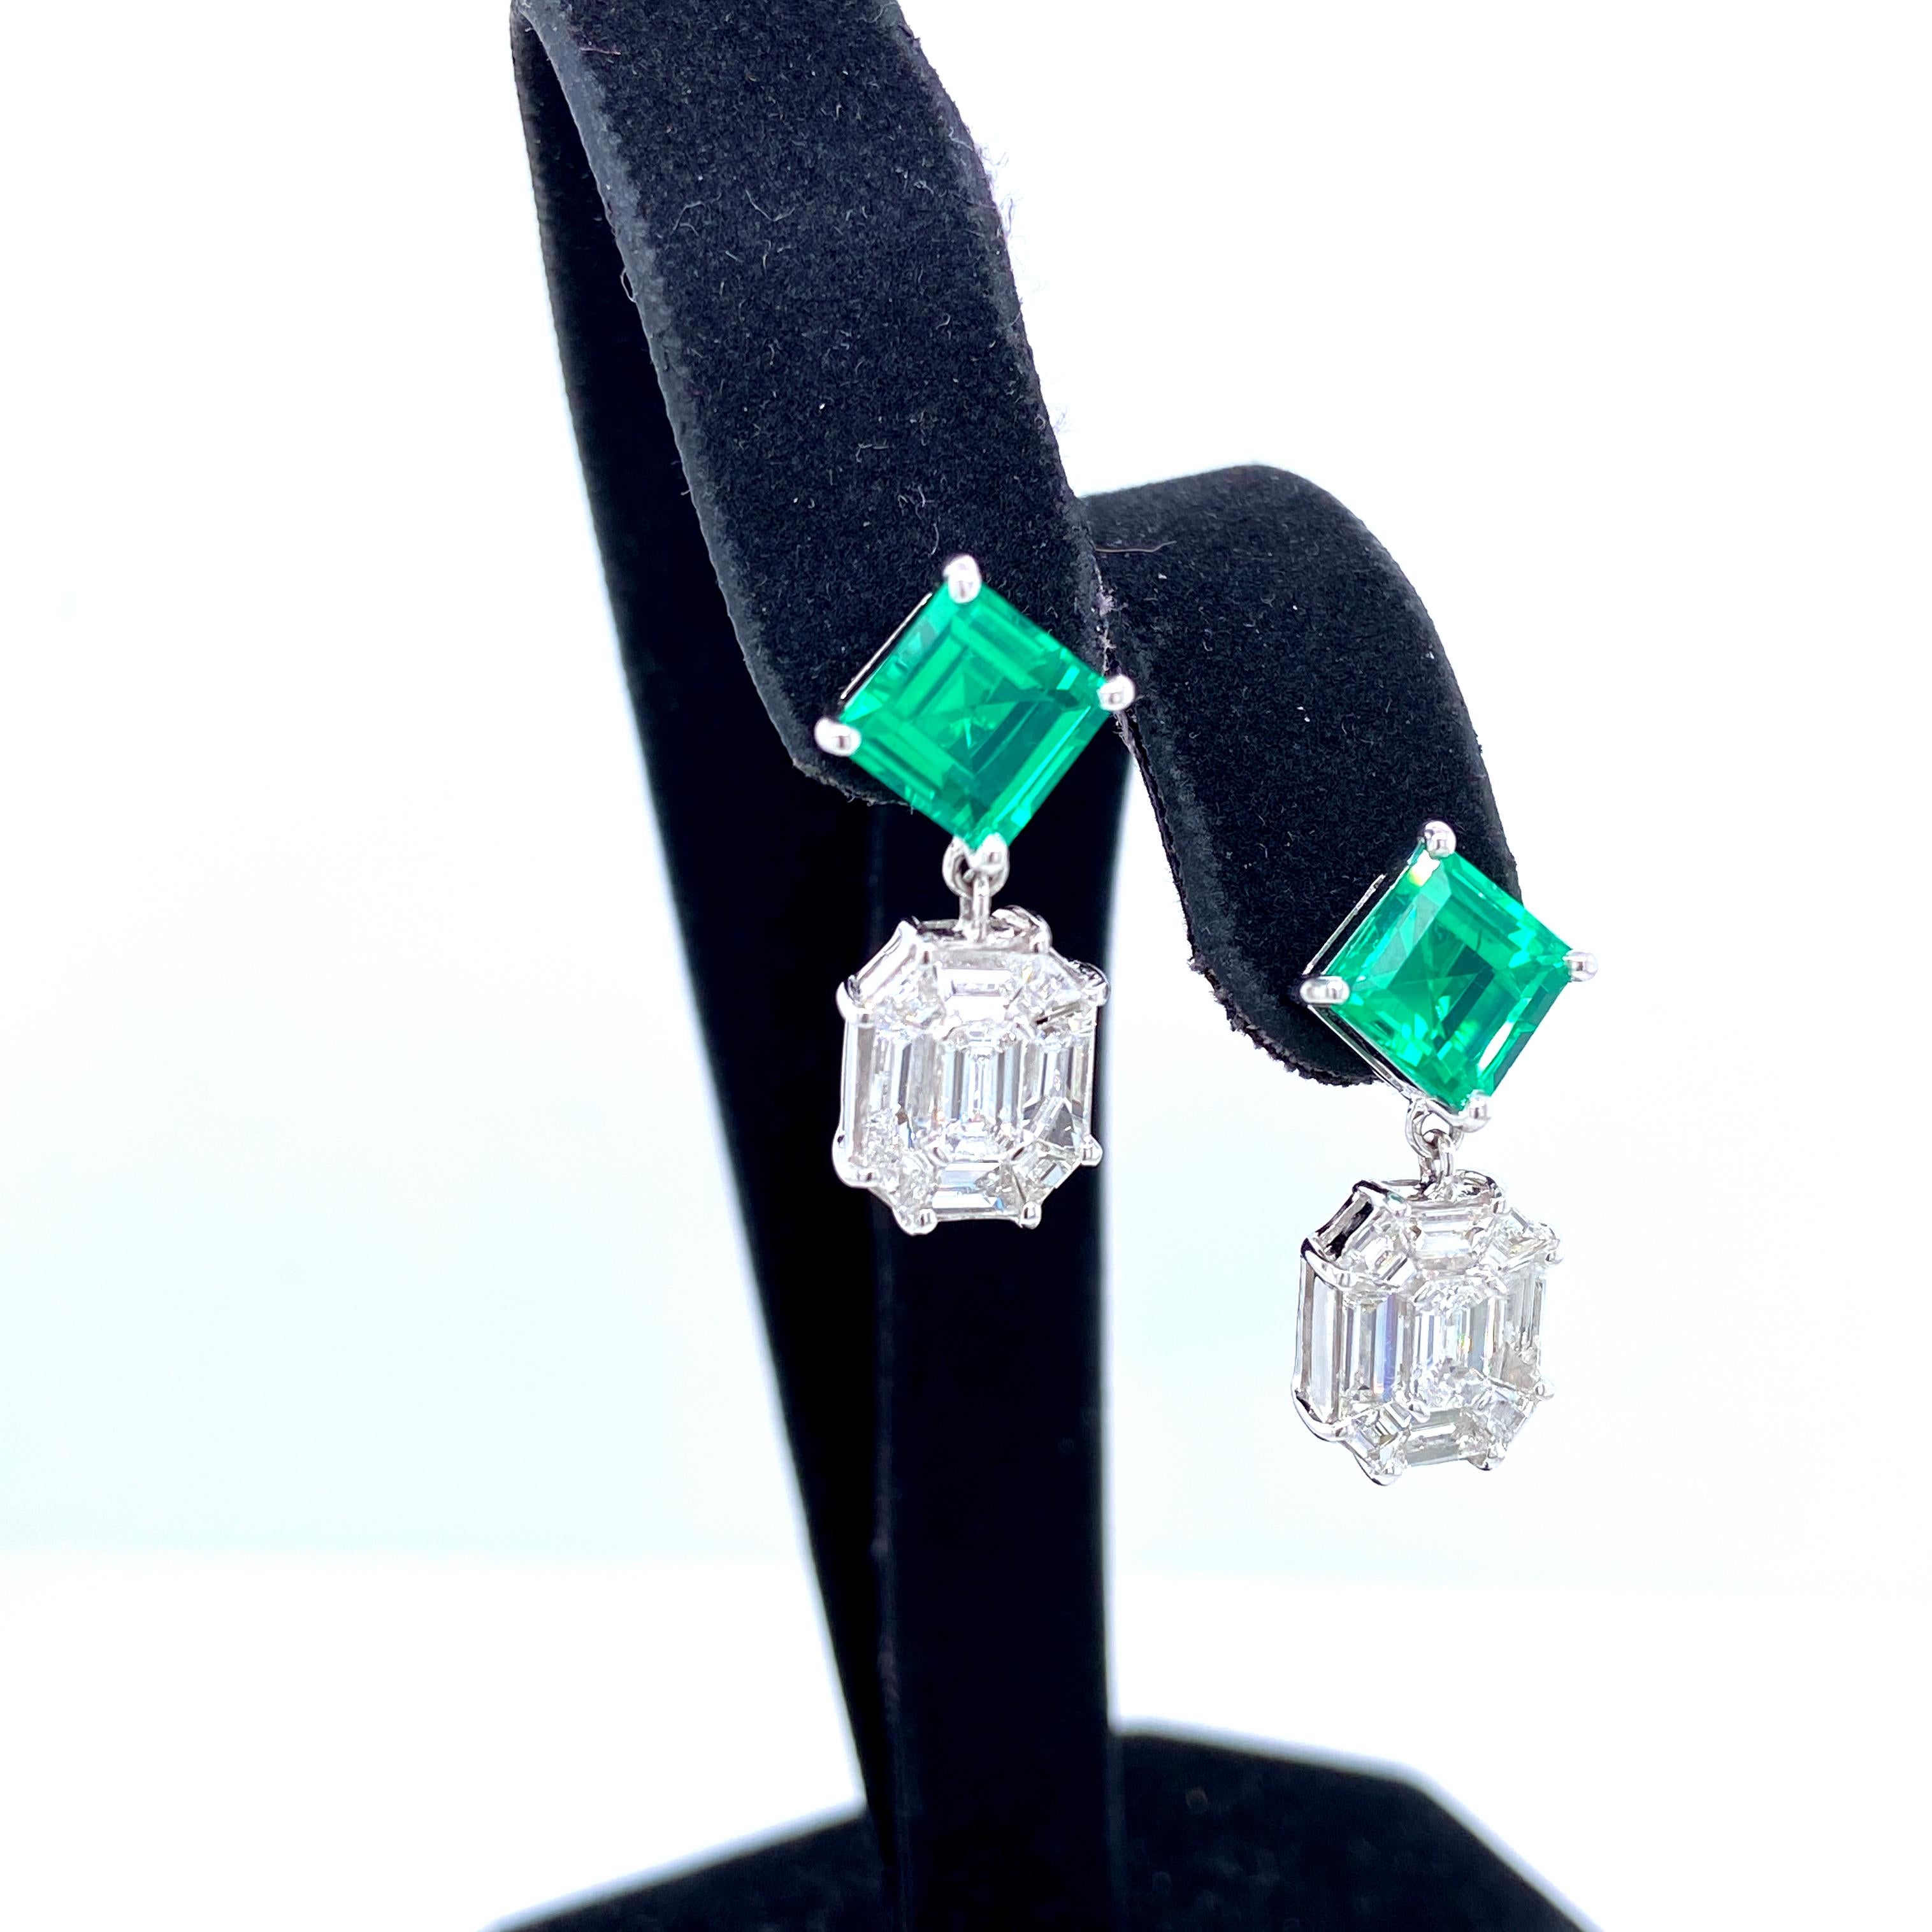 Emerald And White Diamond Gold Earrings:

An elegant pair of earrings, it features 3.45 carat of green Emerald beryl and 2.25 carat of illusion-set white diamonds! The emerald are beryl doublets of fine quality and colour, with superb brilliance and